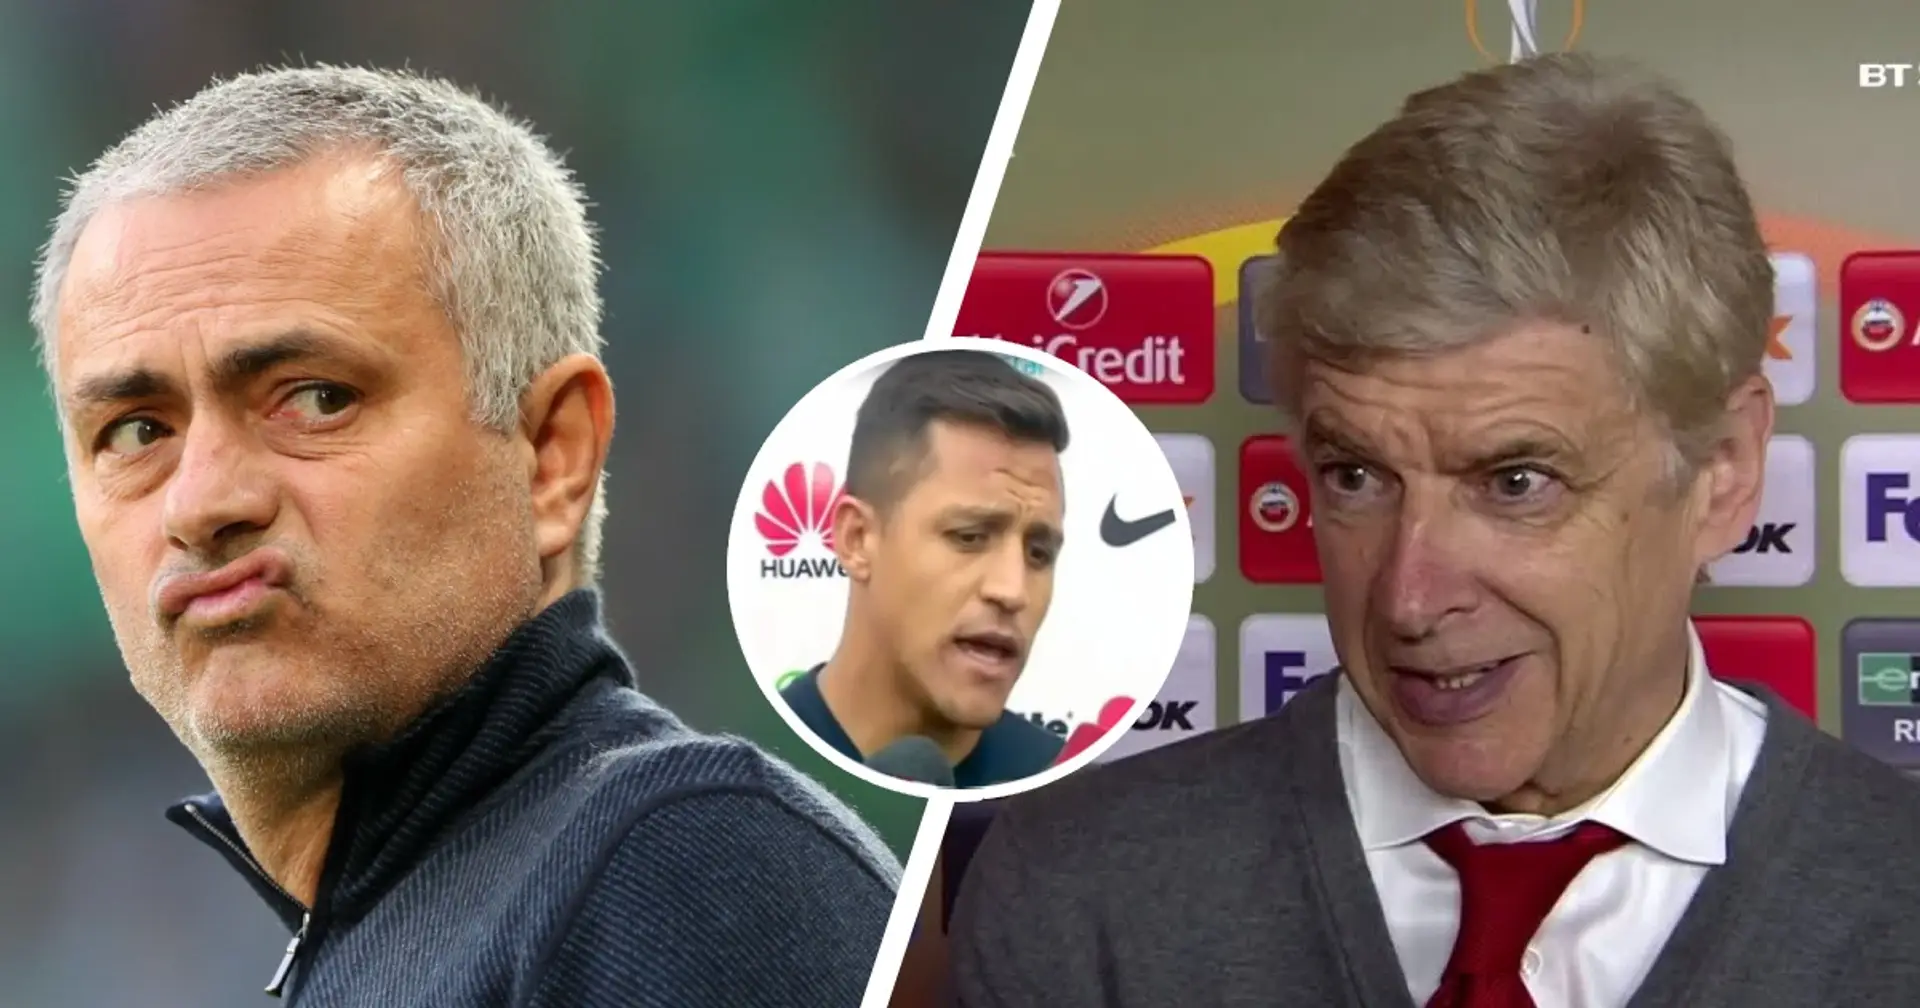 'He was like my dad': Alexis Sanchez reveals manager he shares close bond with - not Wenger or Mourinho